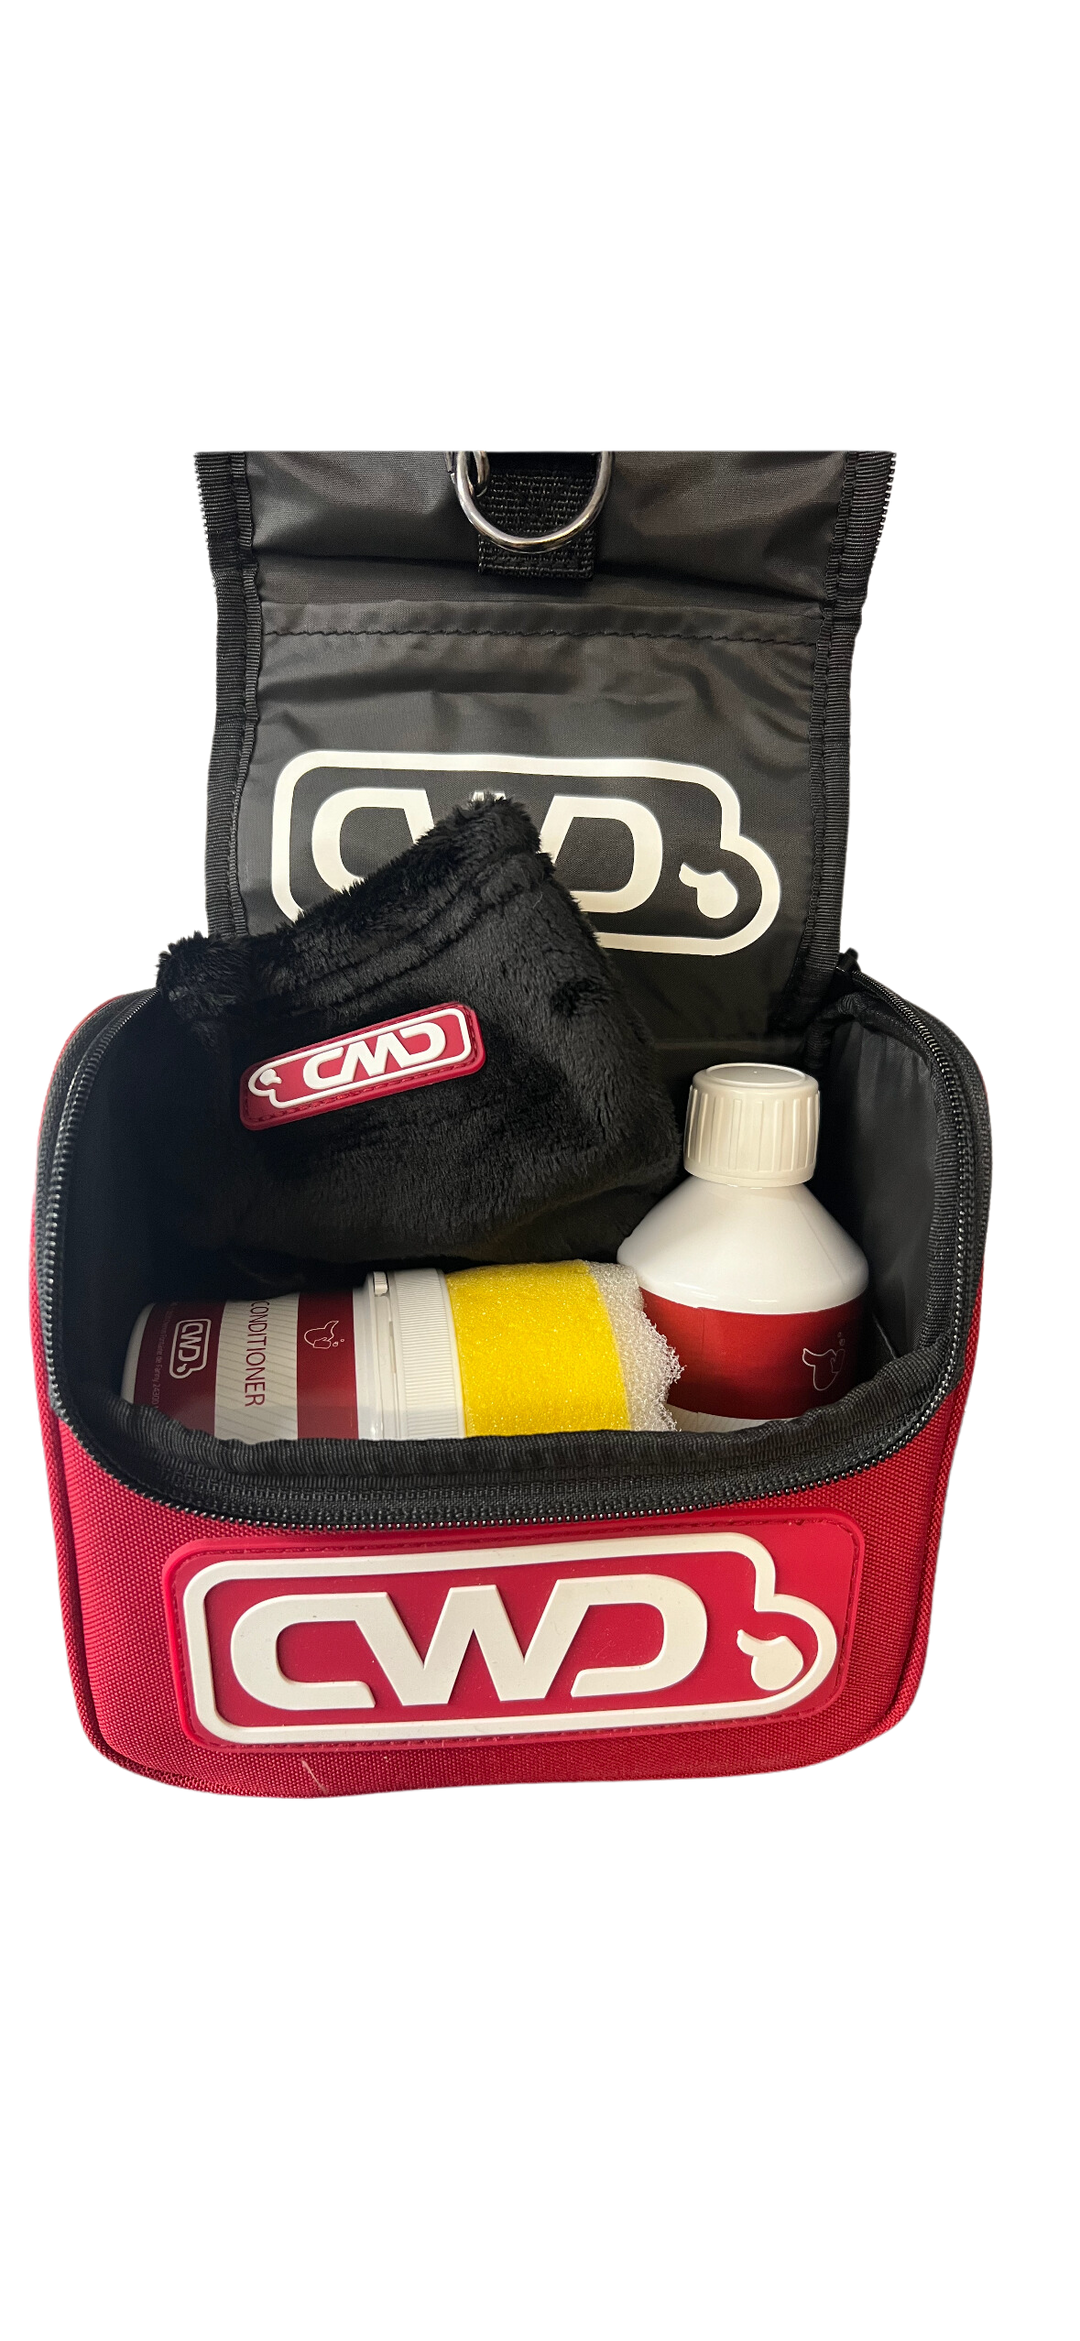 PRE-LOVED CWD CLEANING KIT